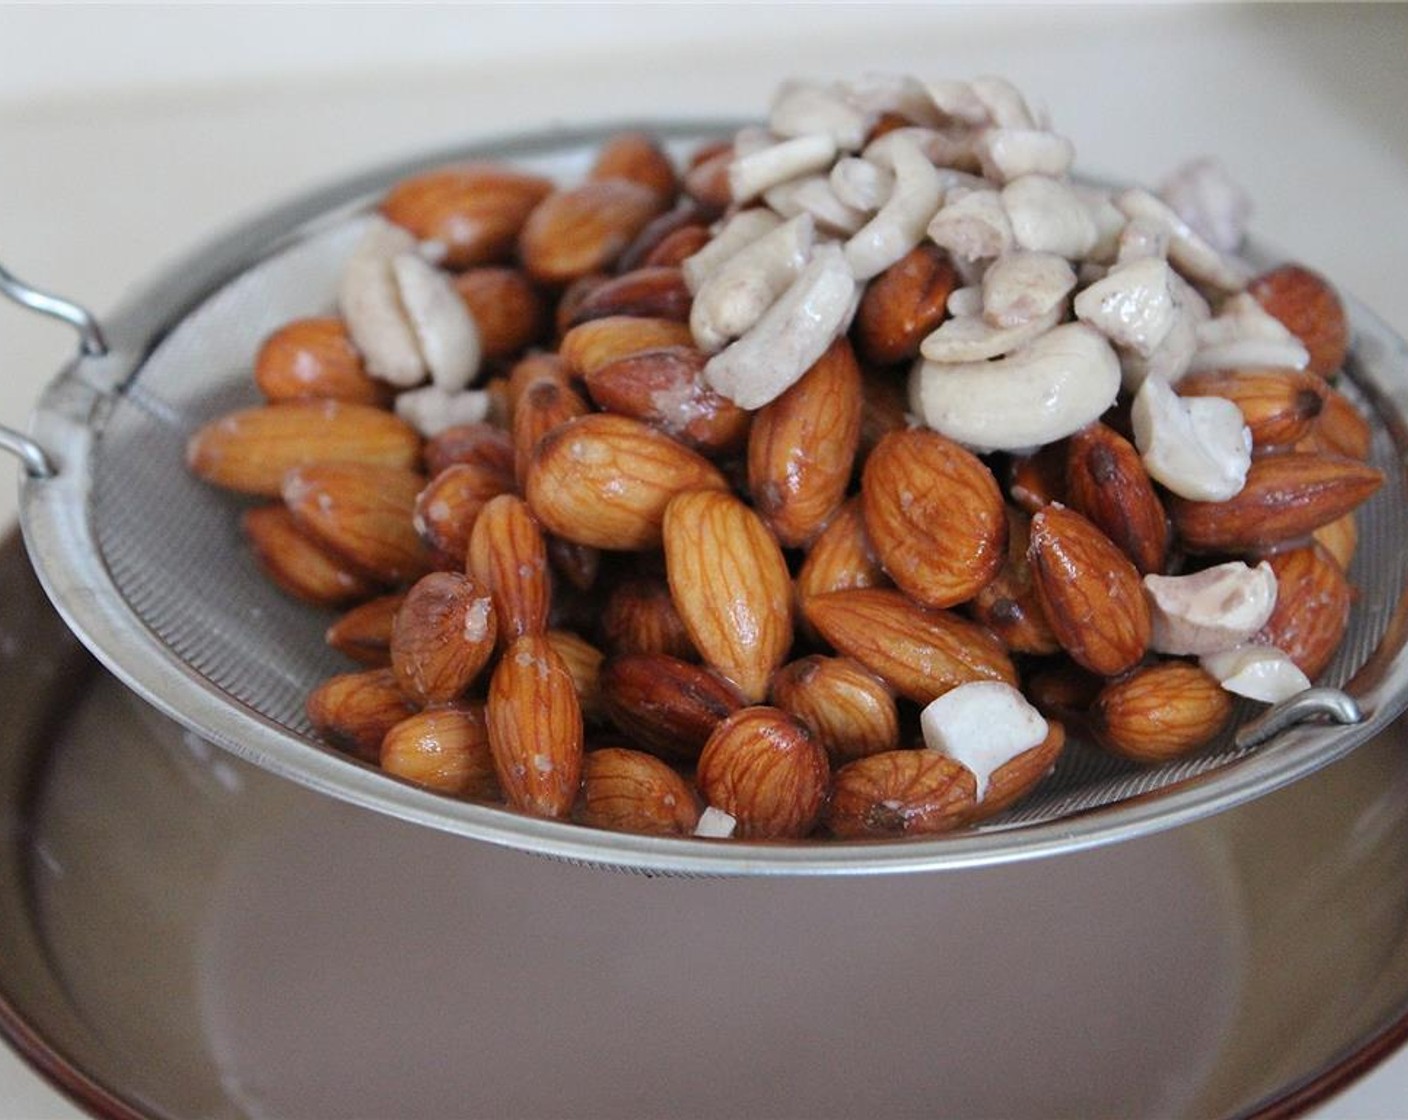 step 1 To make your own cream, start by soaking the Cashew Nuts (1/4 cup) and Almonds (3/4 cup) overnight. Separate the cashews from the almonds. Reserve 3 tablespoons of the water they were soaking in.